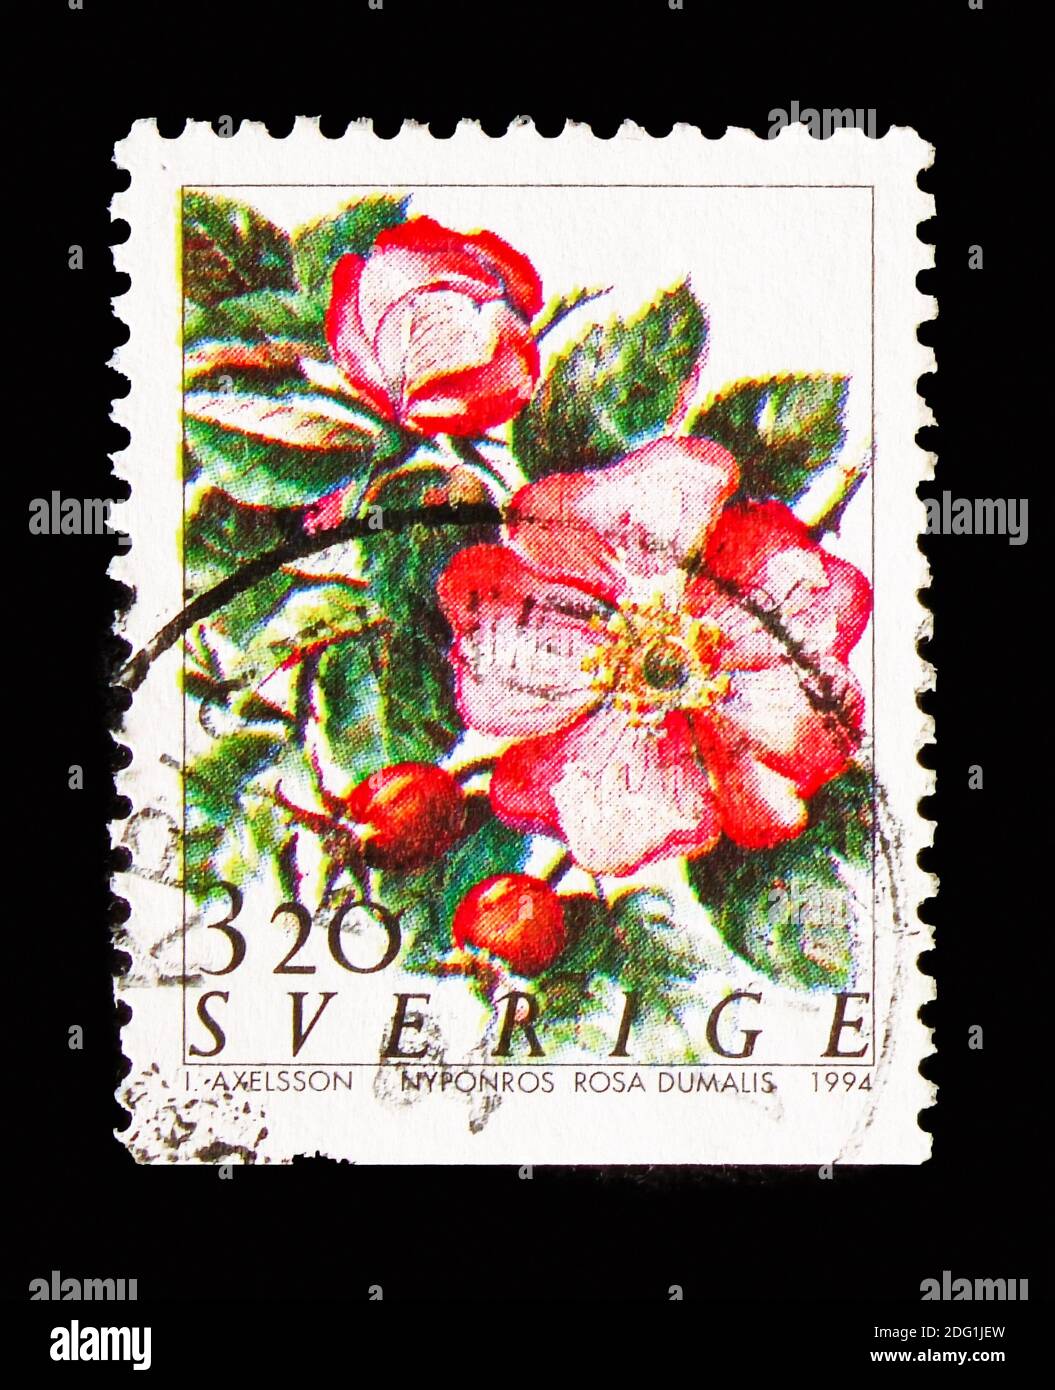 MOSCOW, RUSSIA - AUGUST 18, 2018: A stamp printed in Sweden shows Wild Rose (Rosa dumalis), Roses serie, circa 1994 Stock Photo